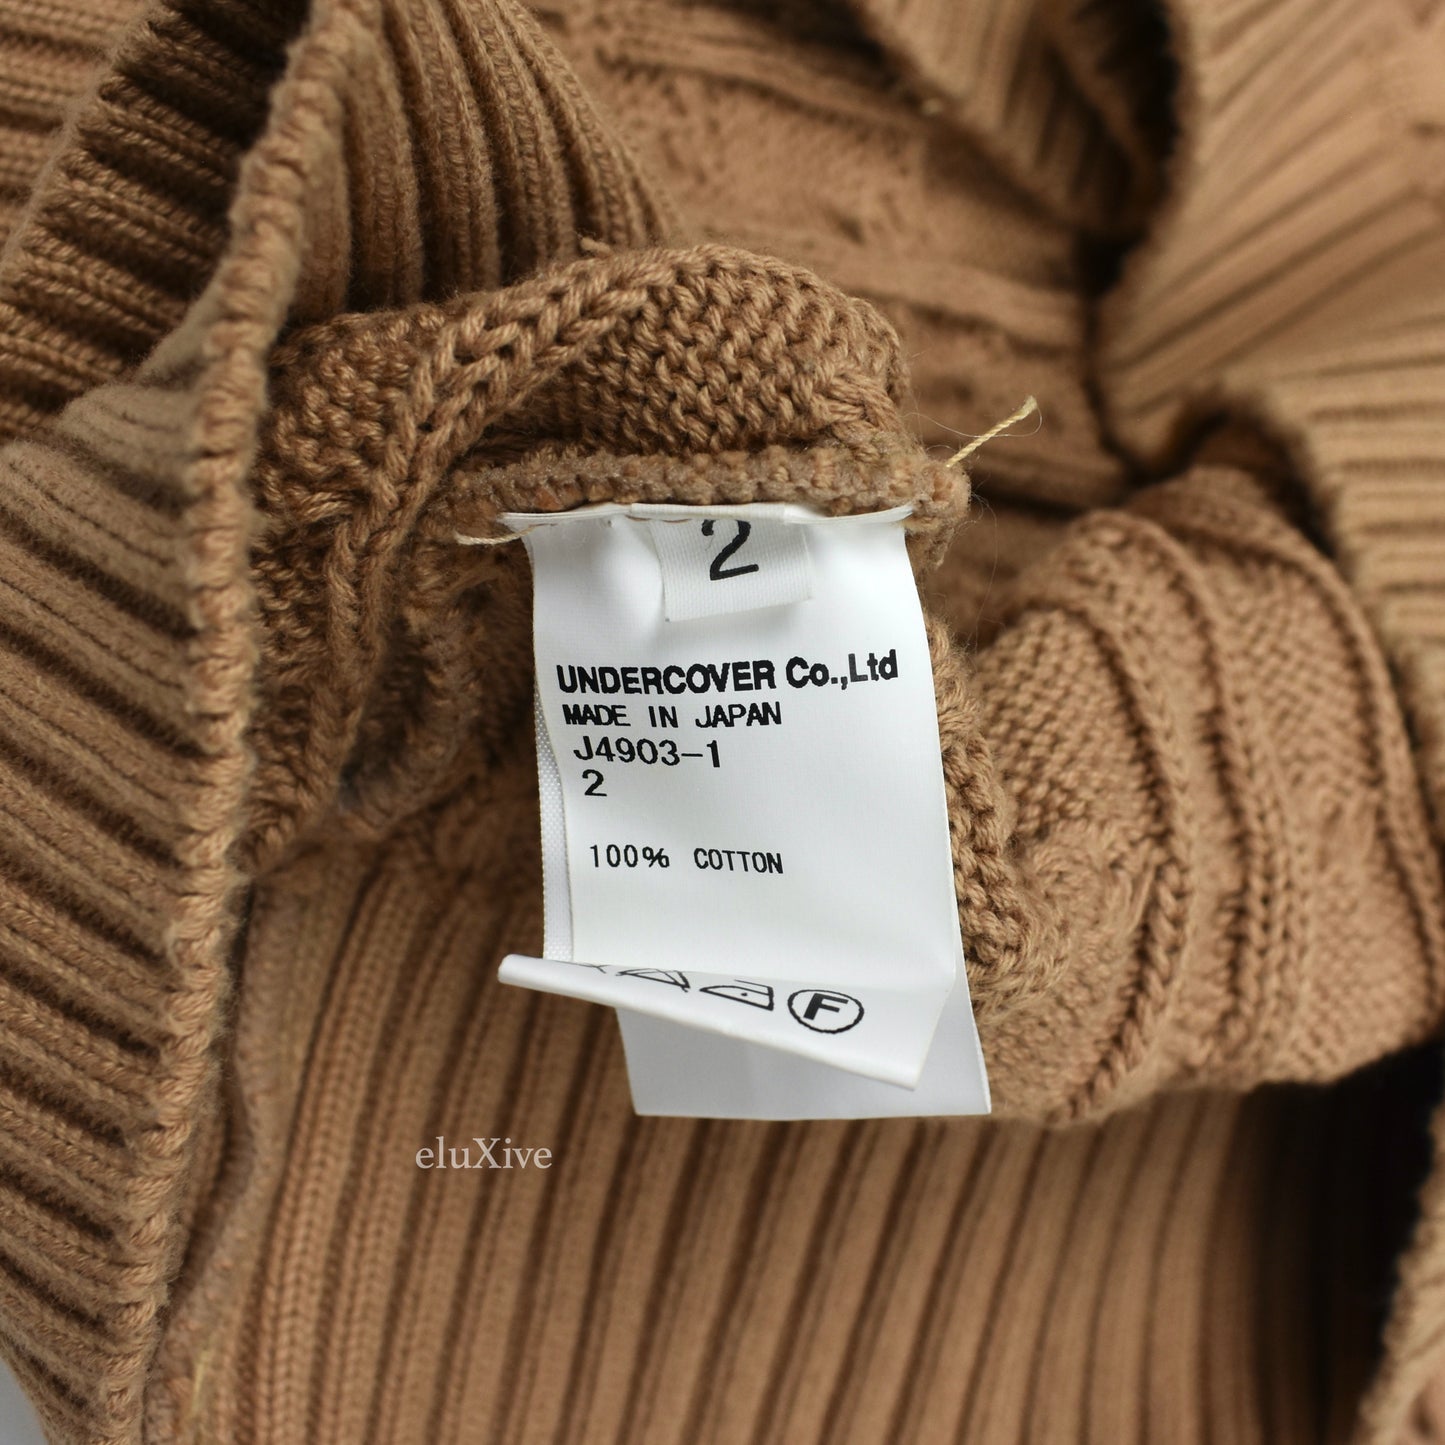 Undercover - AW12 'Psycho Color' Tan Cable Knit Mock Neck Sweater